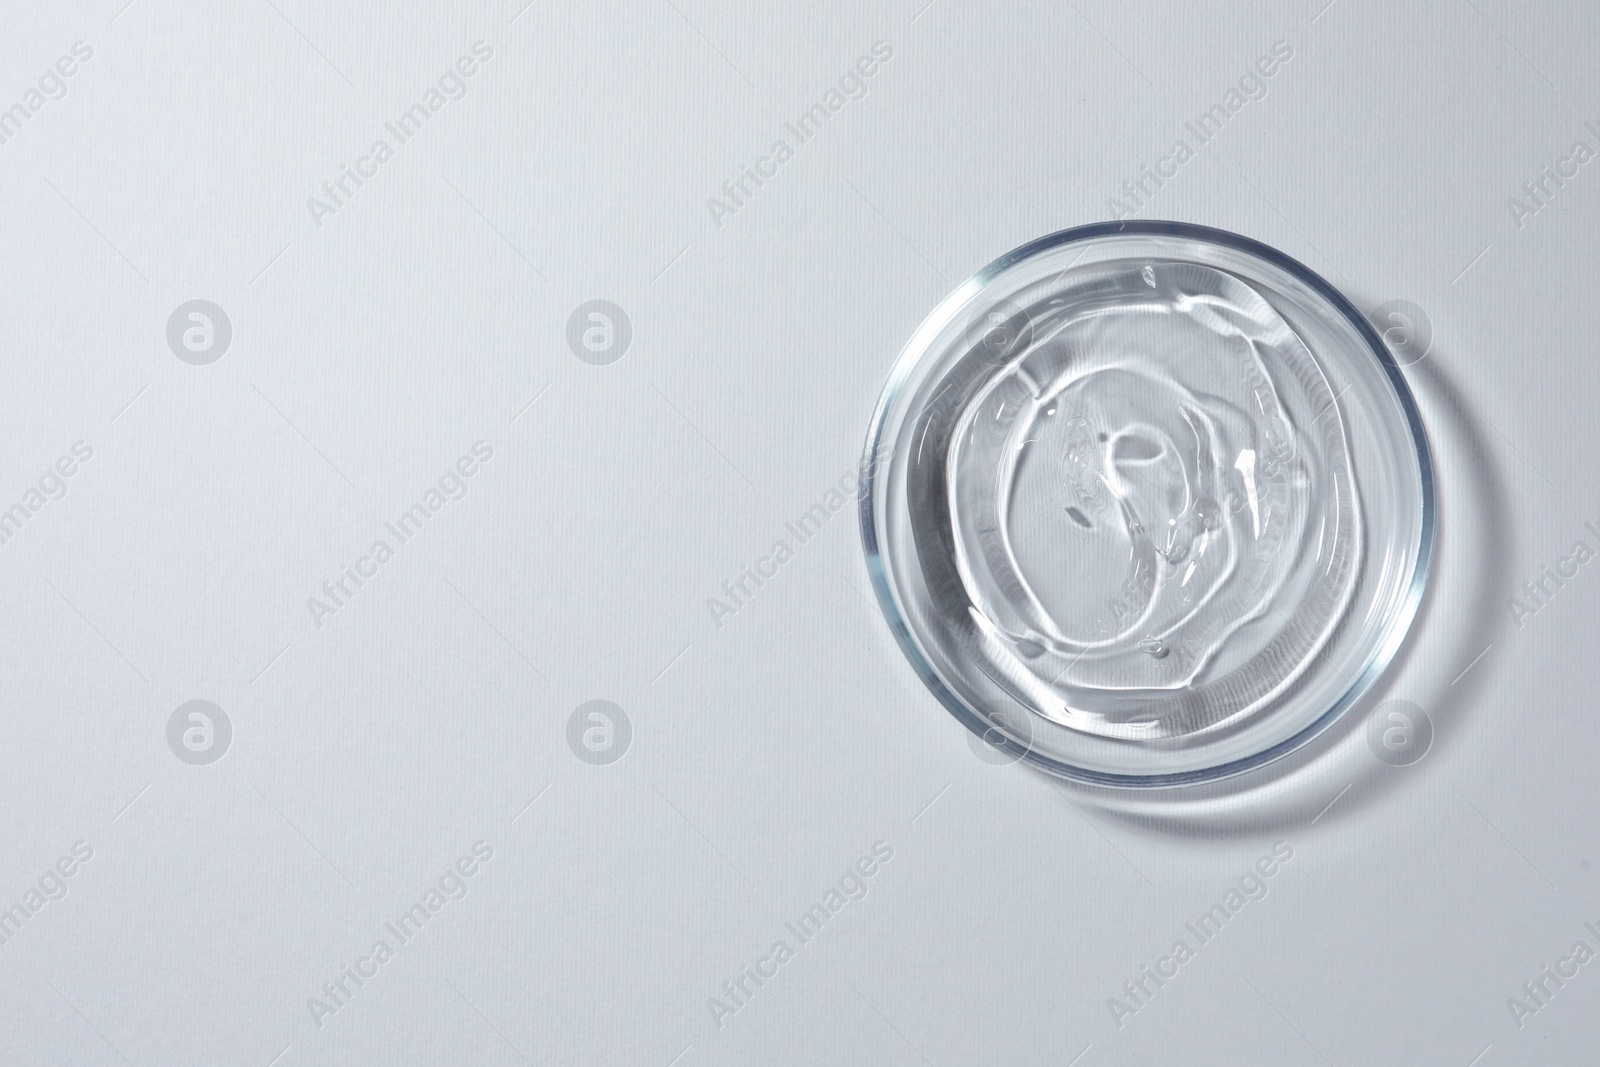 Photo of Petri dish with liquid on white background, top view. Space for text